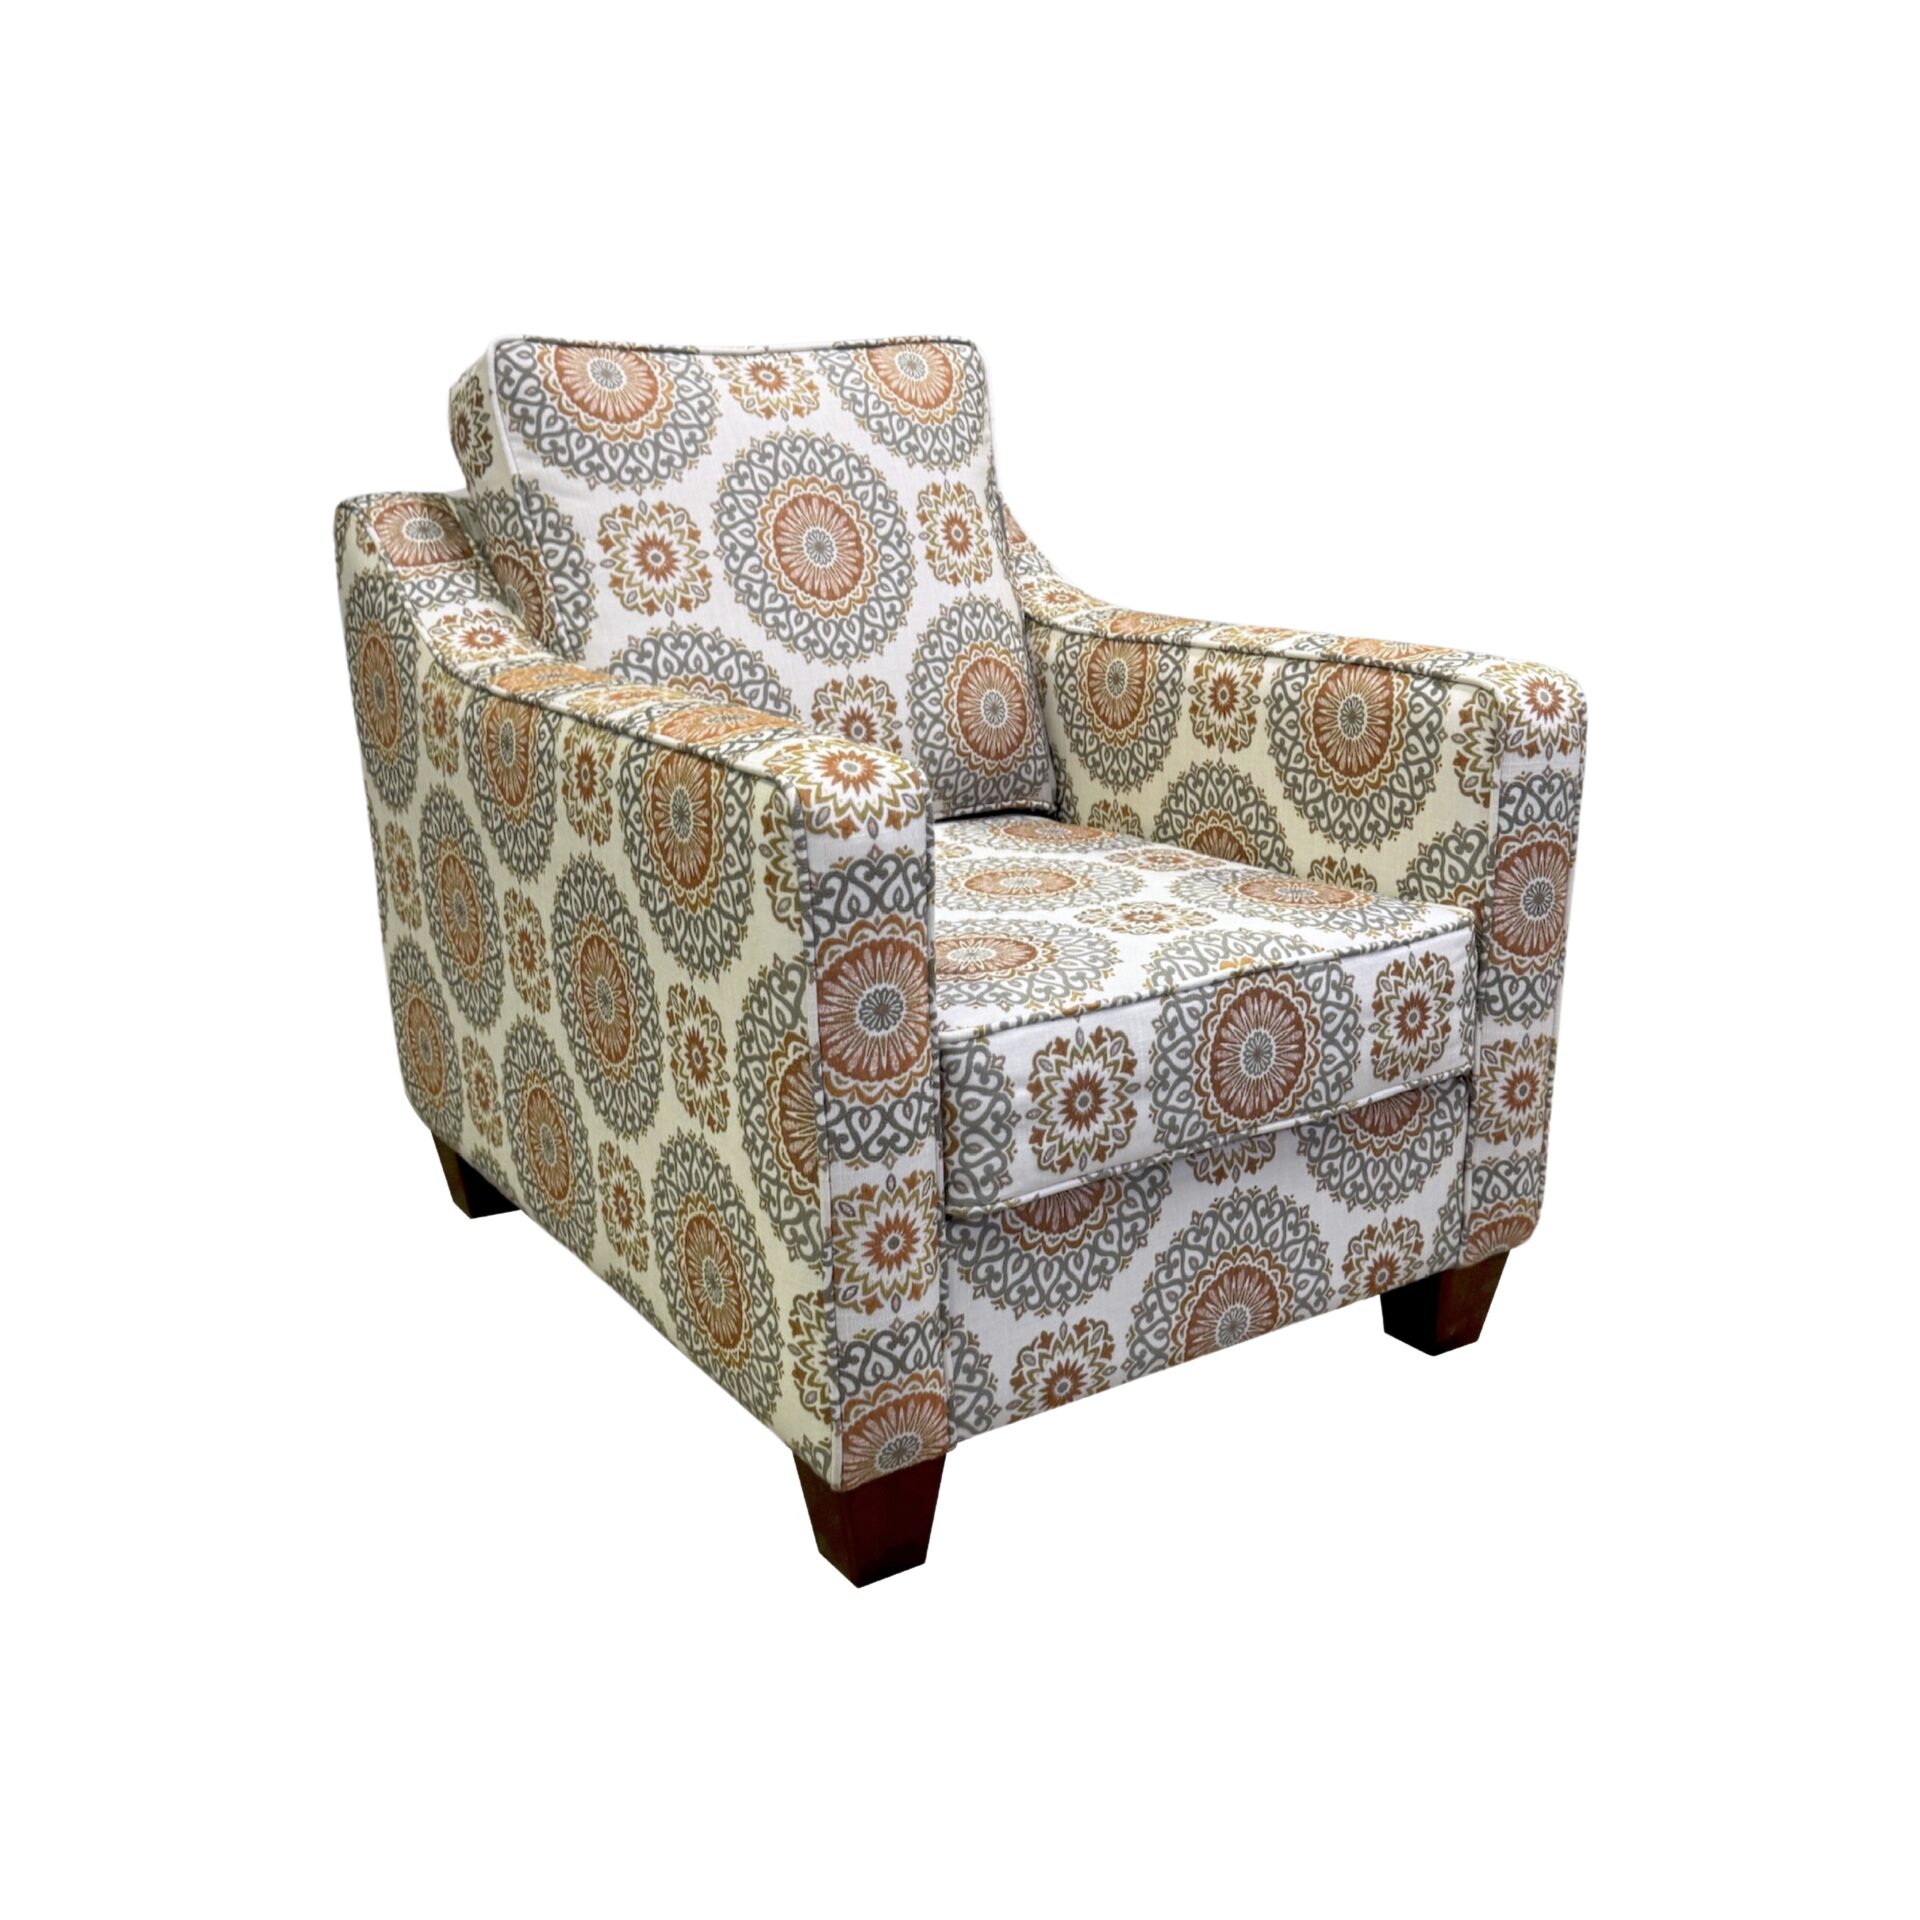 MARCO-ISLAND-upholstered-chair-luxury-furniture-blend-home-furnishings